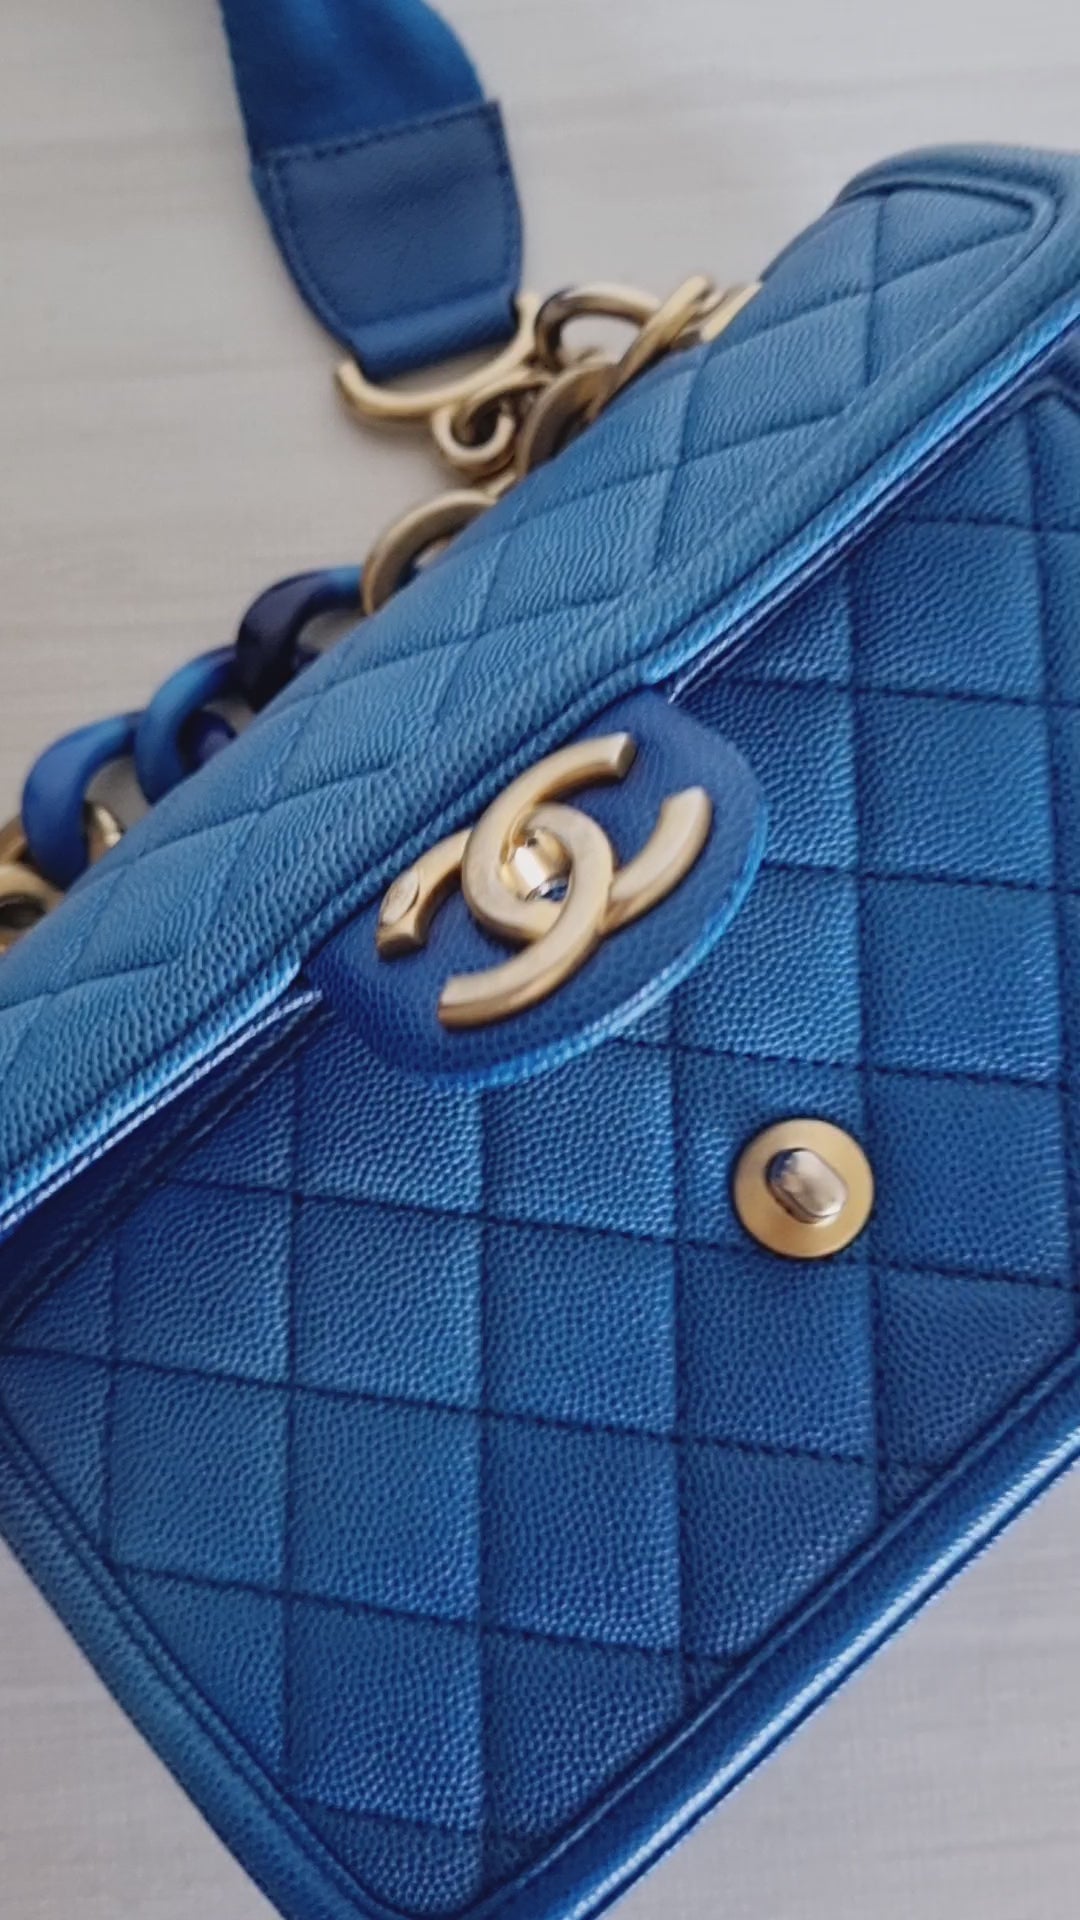 Chanel Sunset by the Sea Small Blue Ombre Caviar Gold Hardware